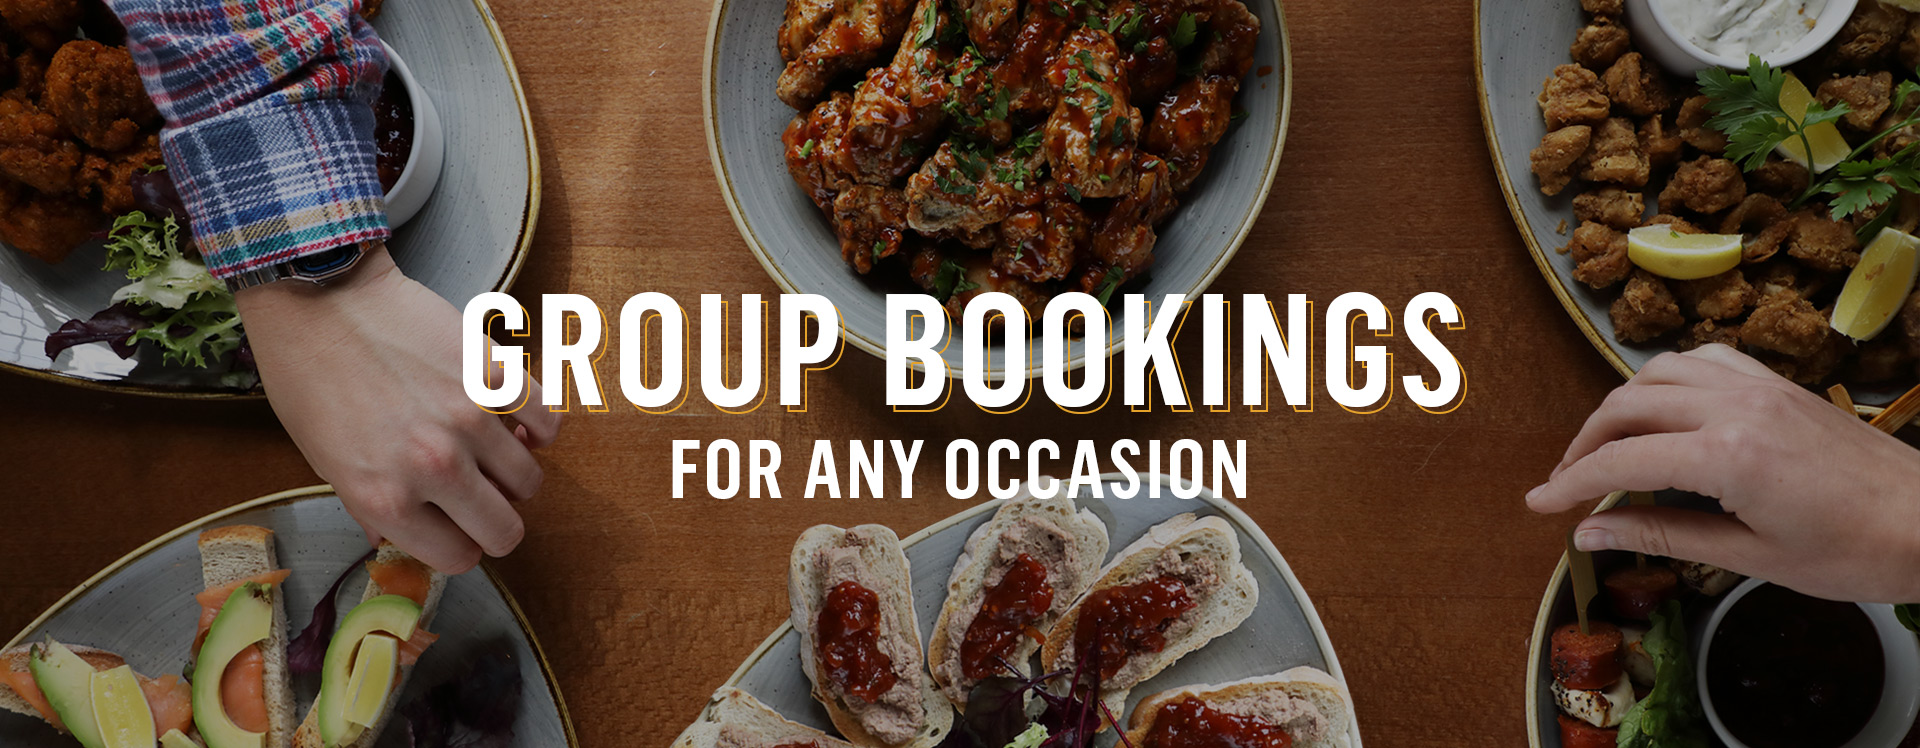 Group Bookings at The Punch Bowl